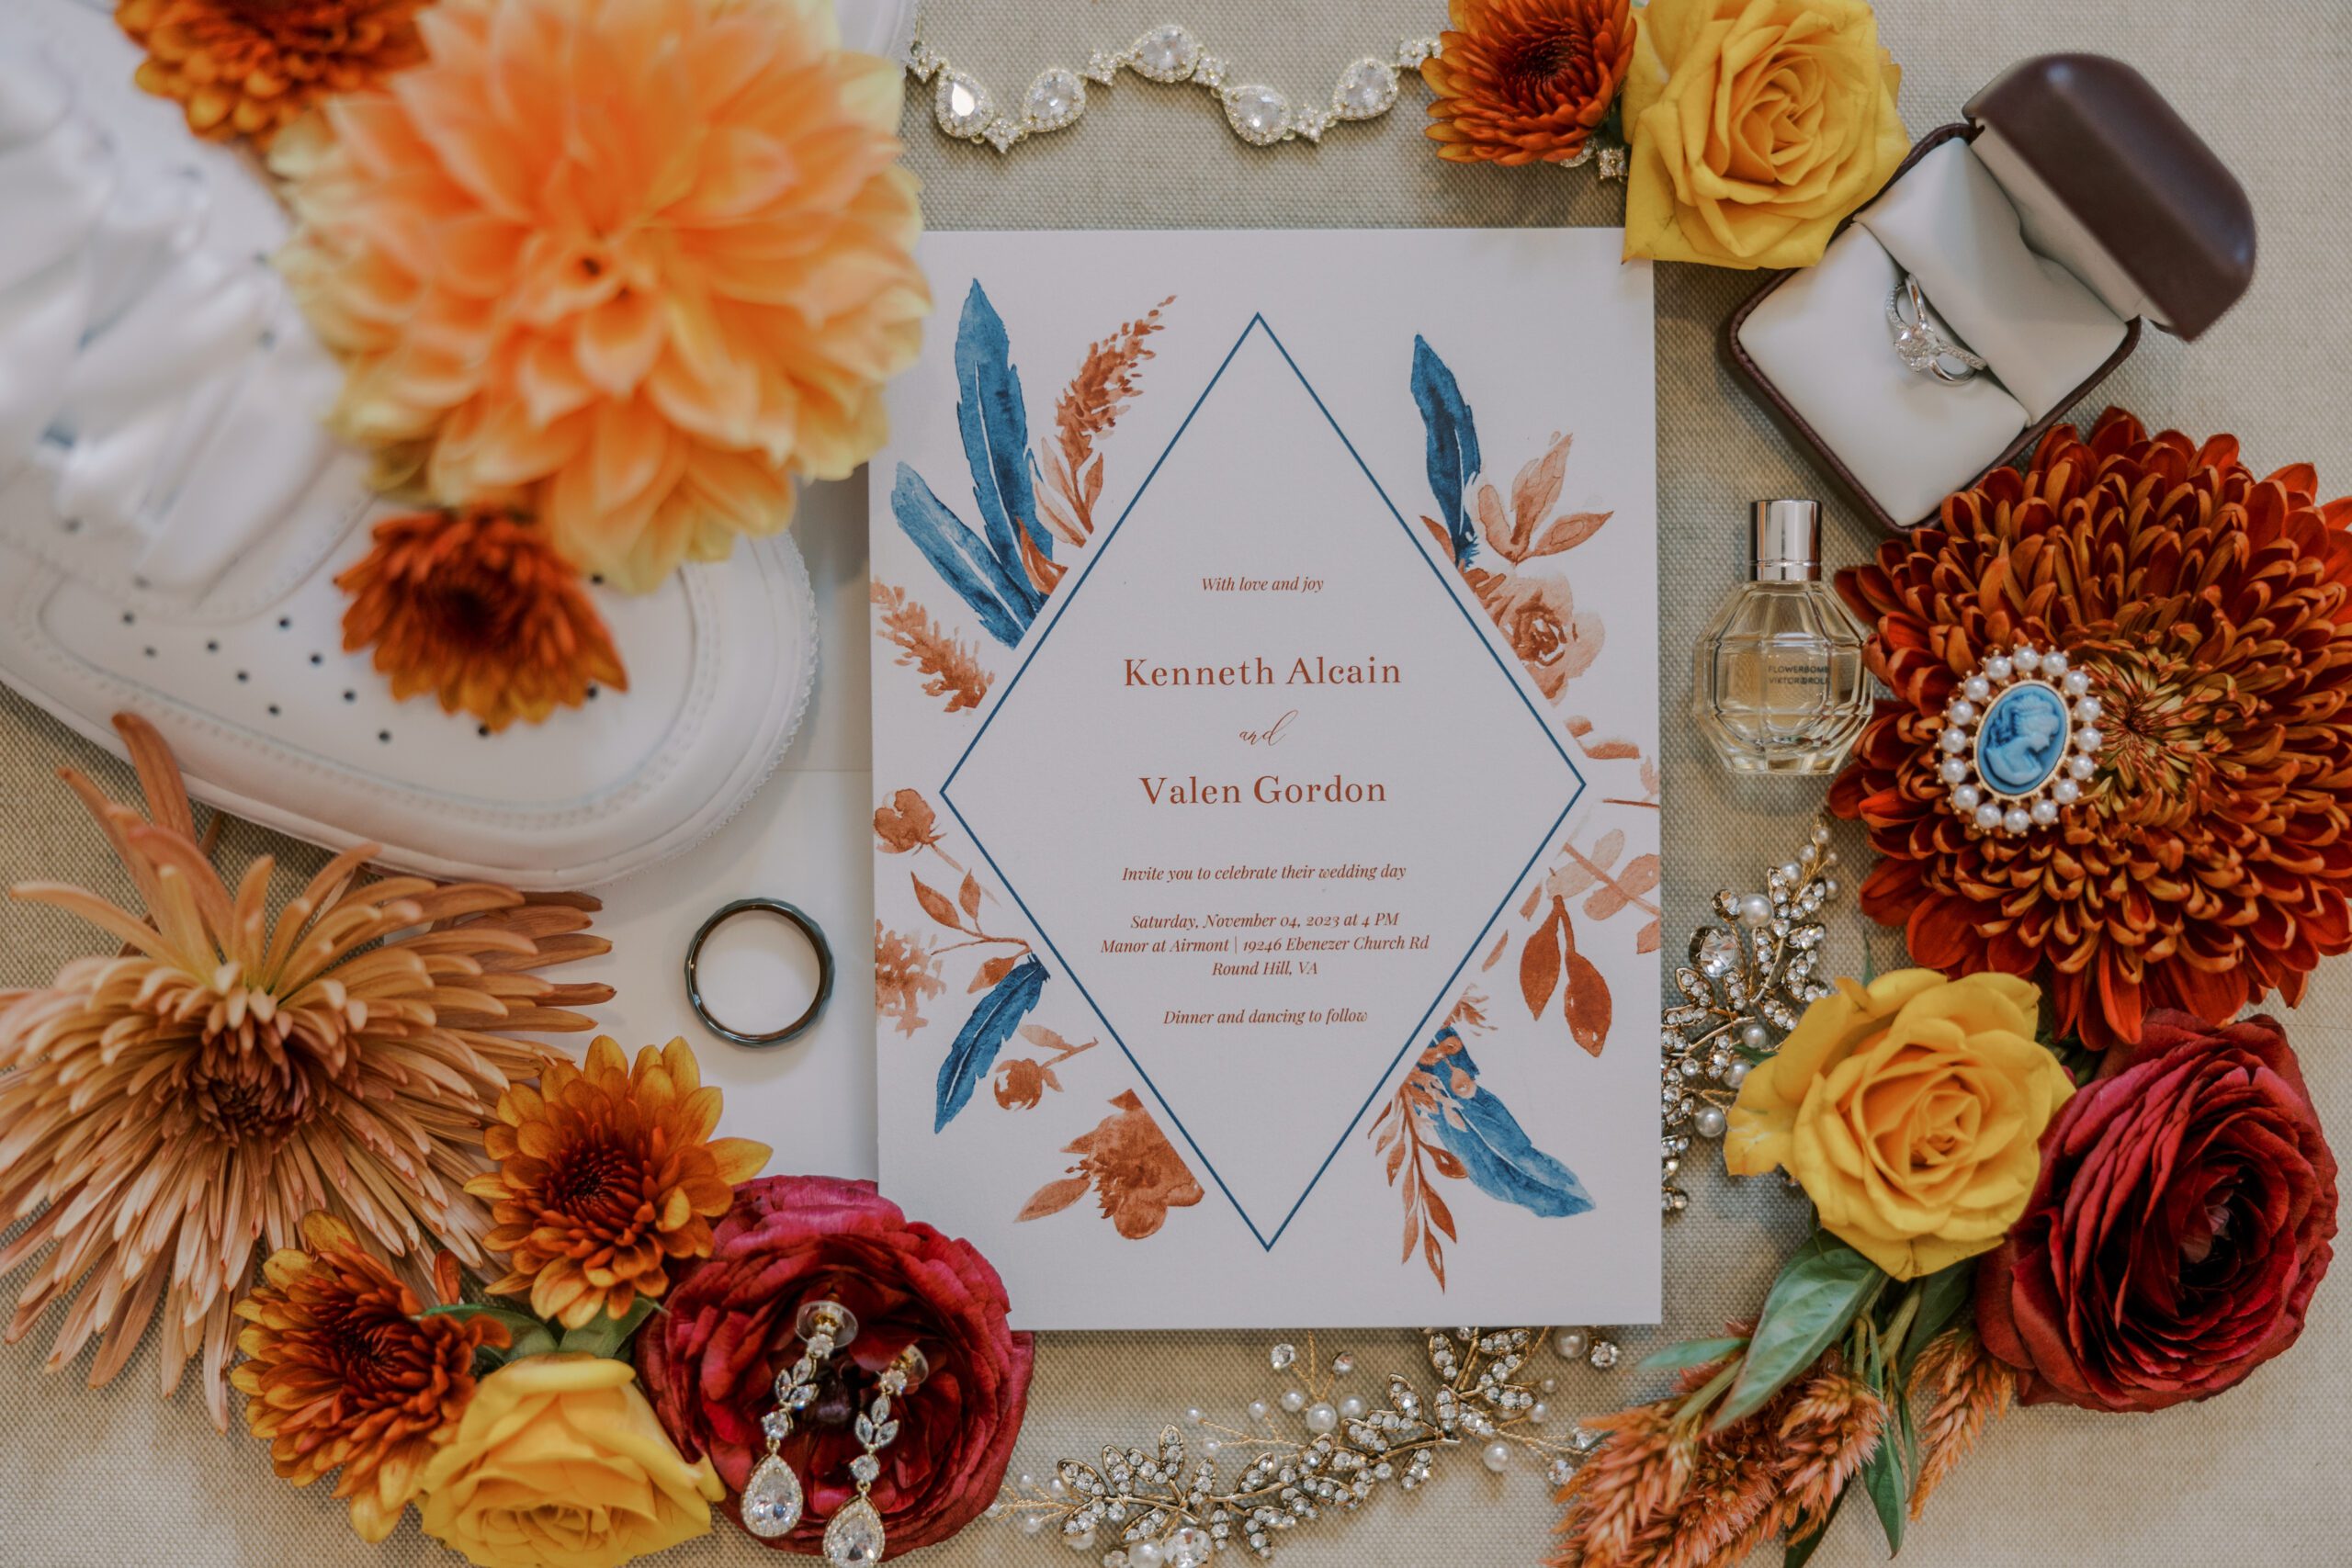 Detailed photo of wedding invitation on white paper with blue diamond shape, details written inside with orange and blue flowers and feathers, other florals, rings, and jewelry surround the invitation